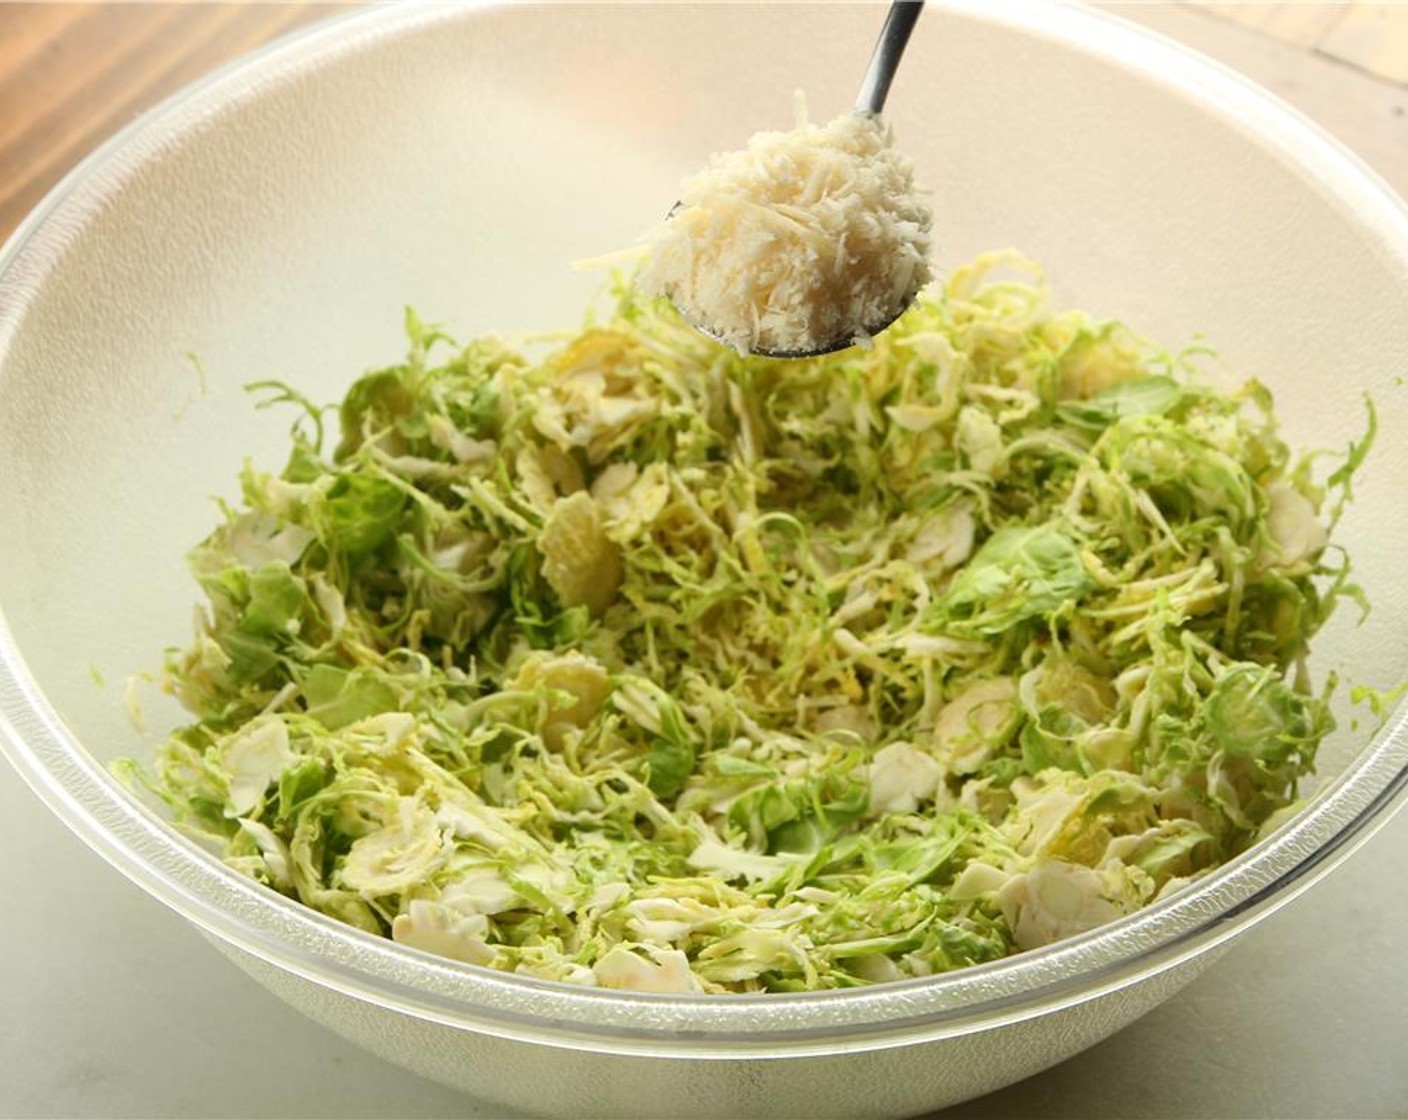 step 7 Add more Parmesan Cheese (to taste) over the shaved brussels sprouts.